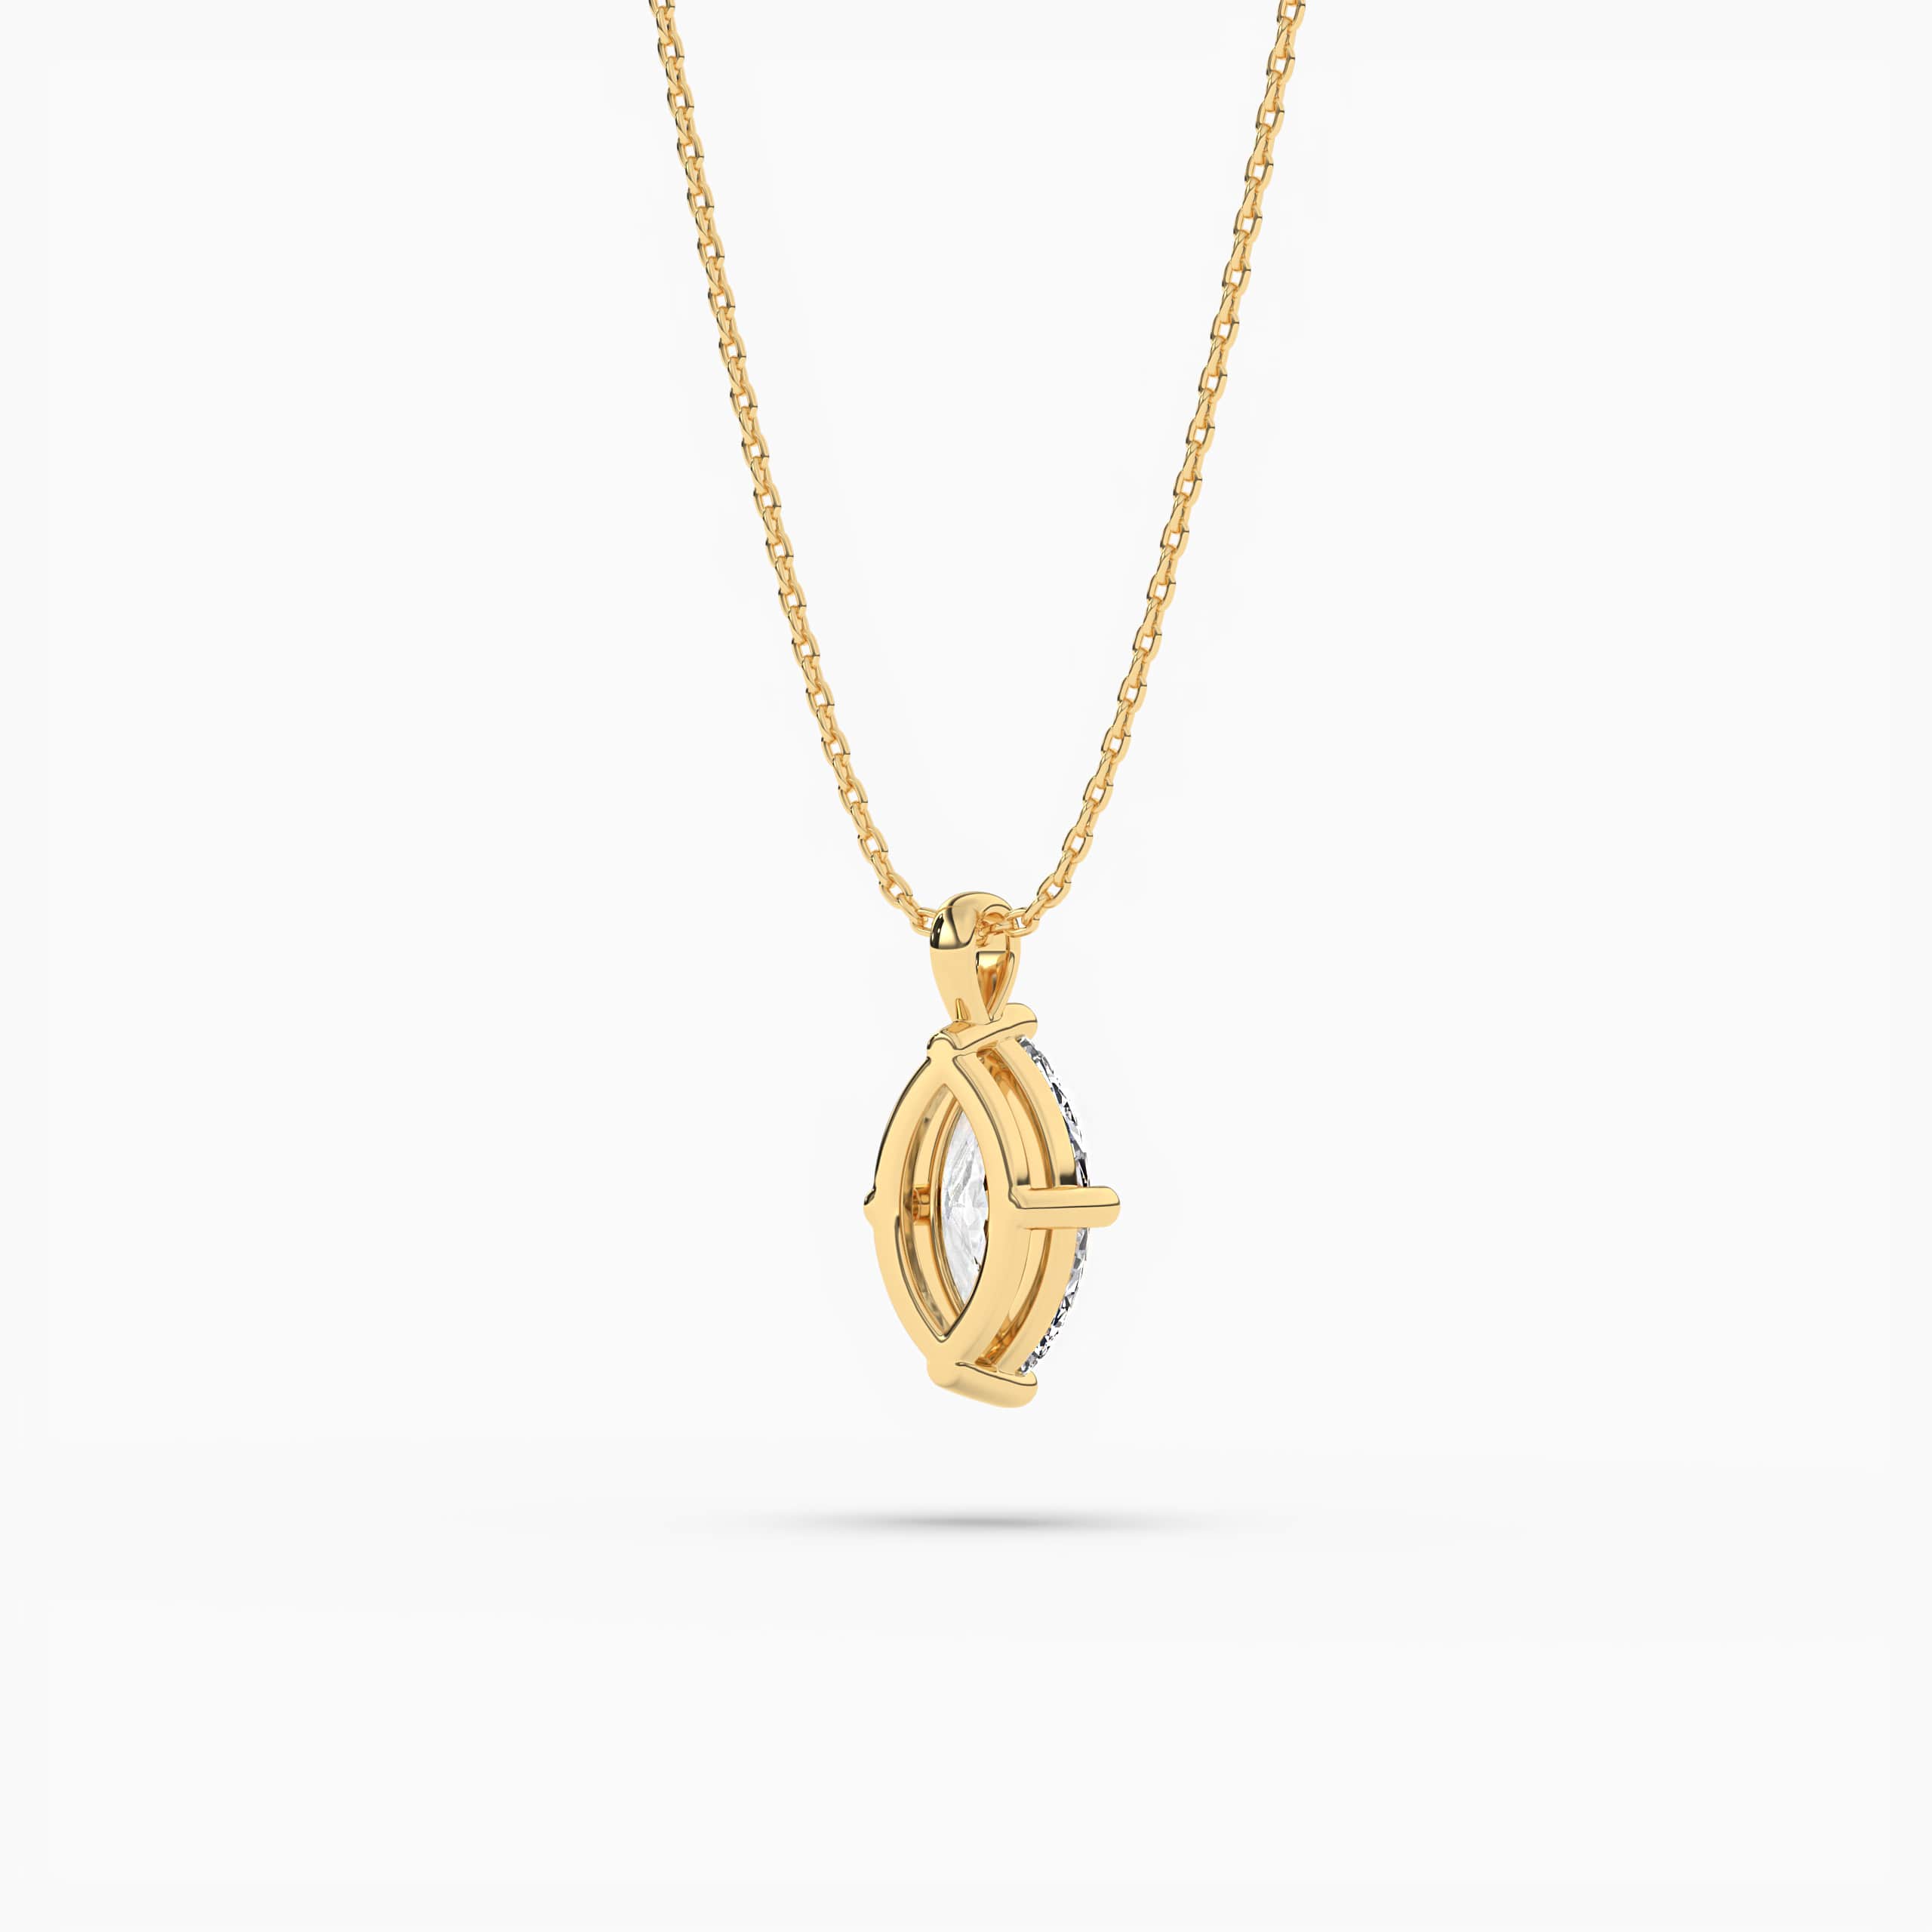 Marquise Cut Diamond by Diamond Essence set in Solid Yellow Gold